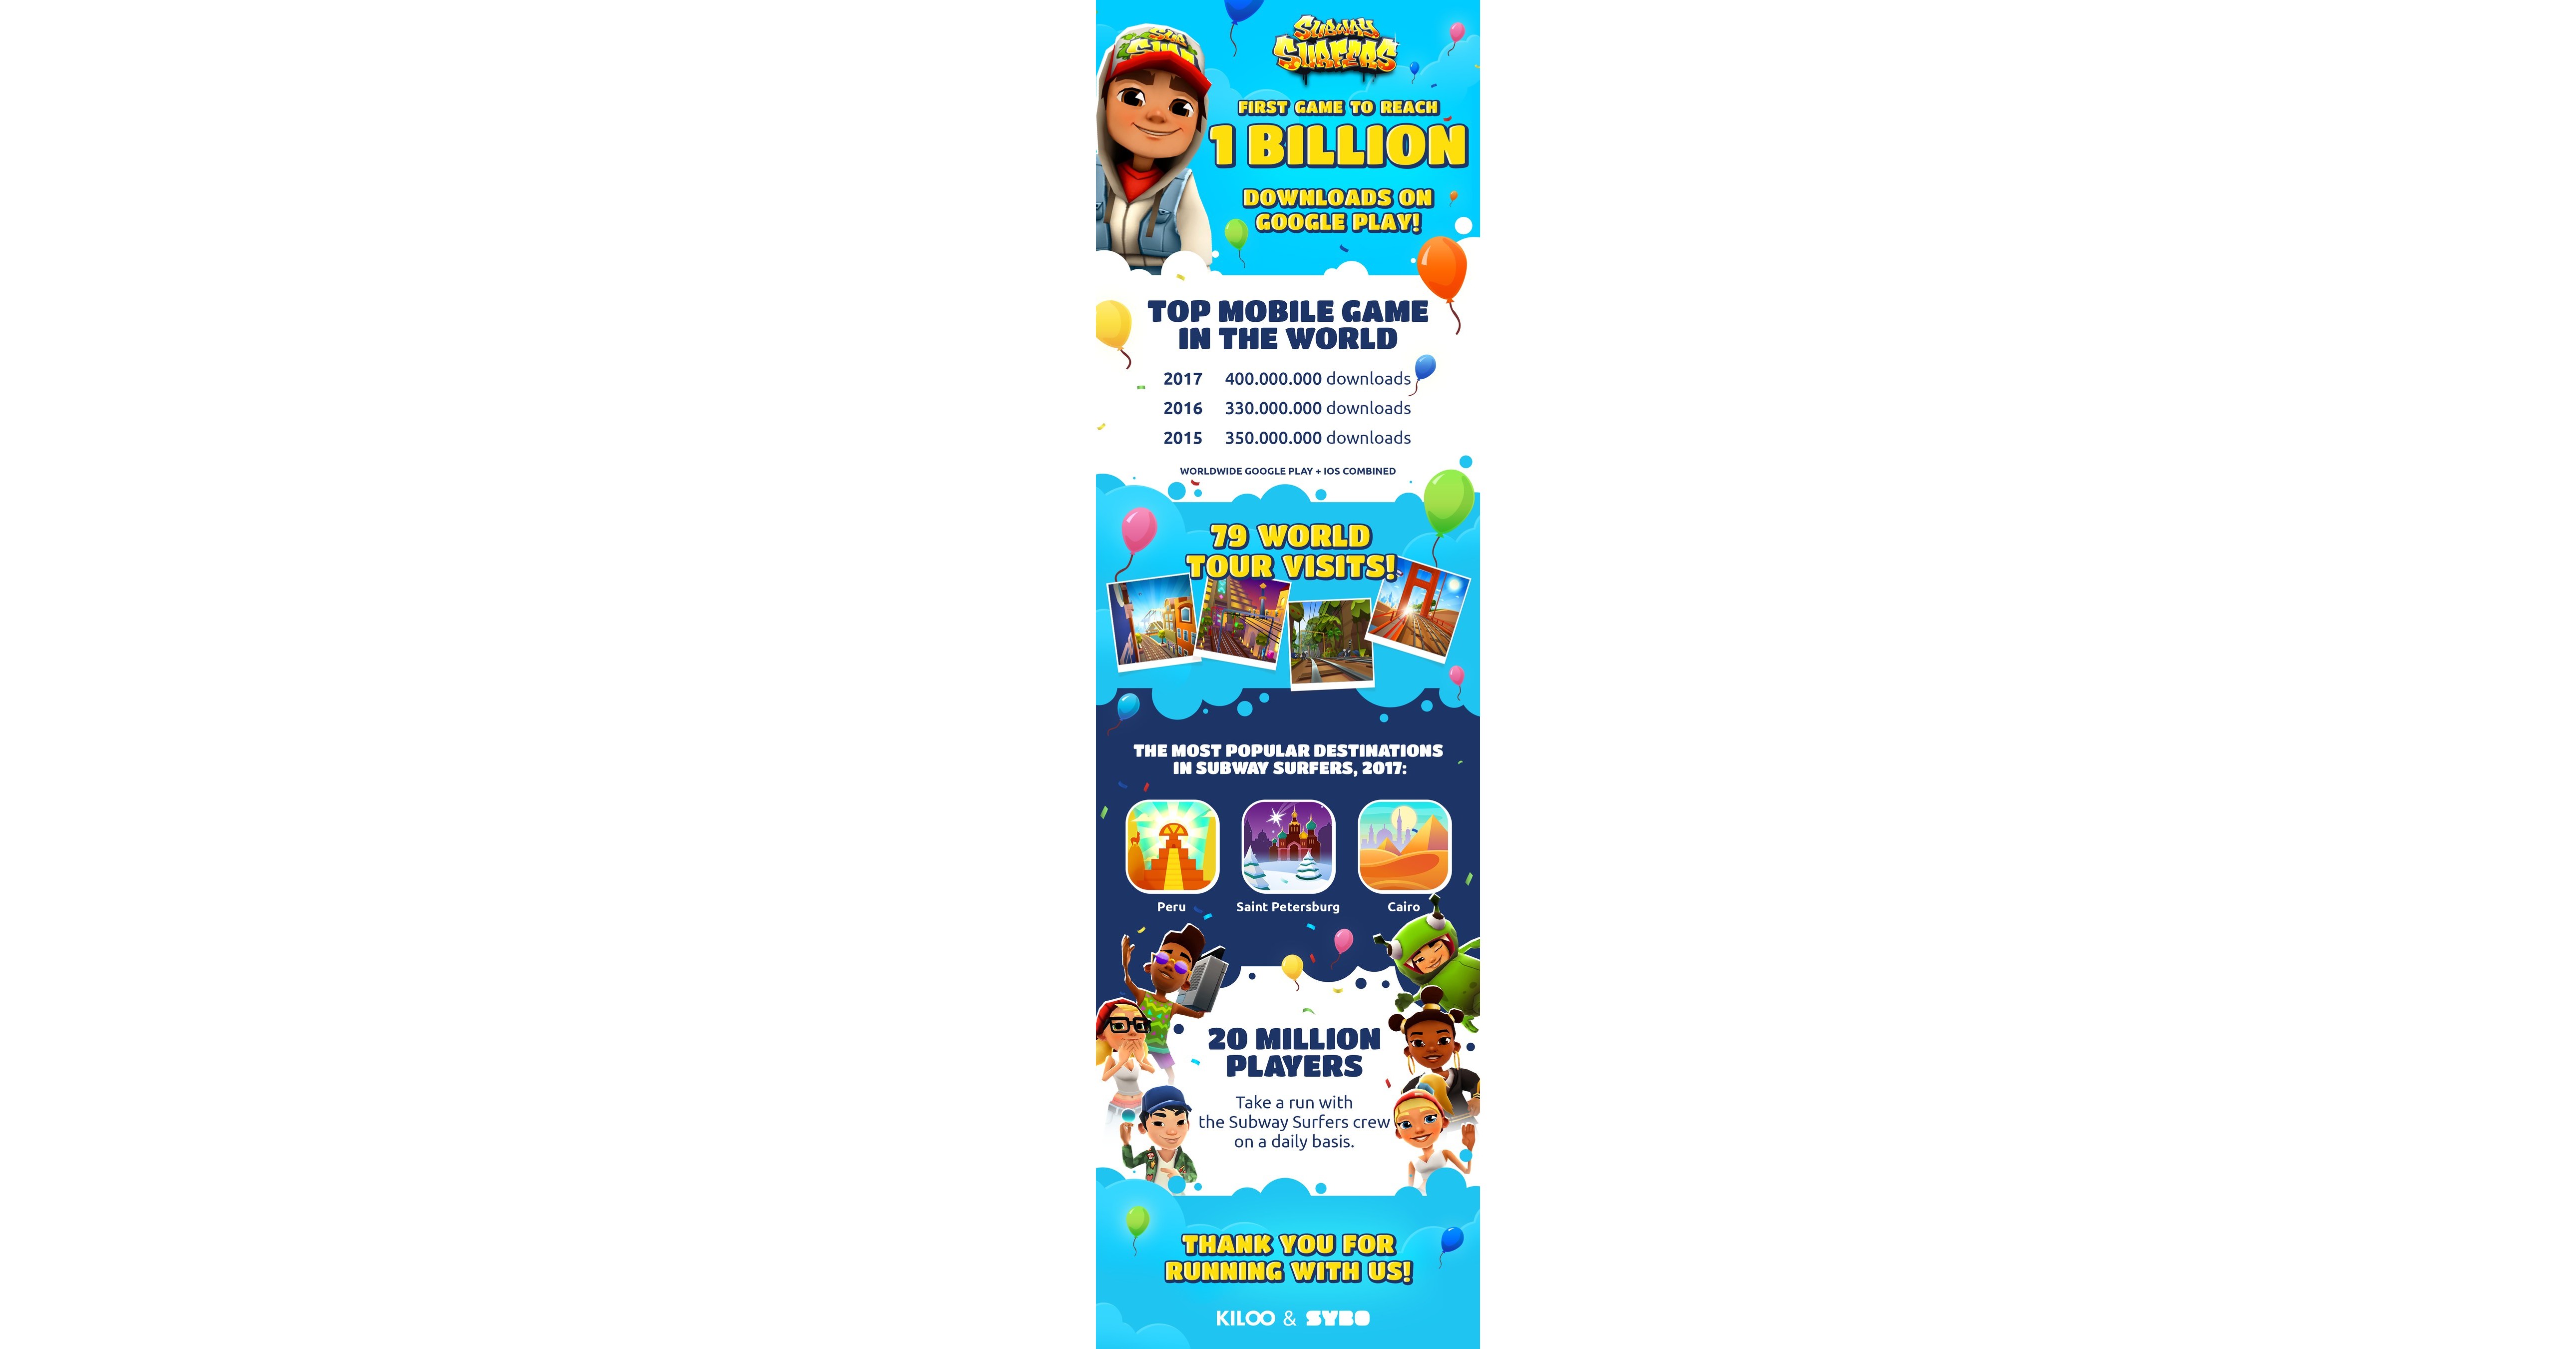 Subway Surfers is the first game to exceed 1 billion downloads